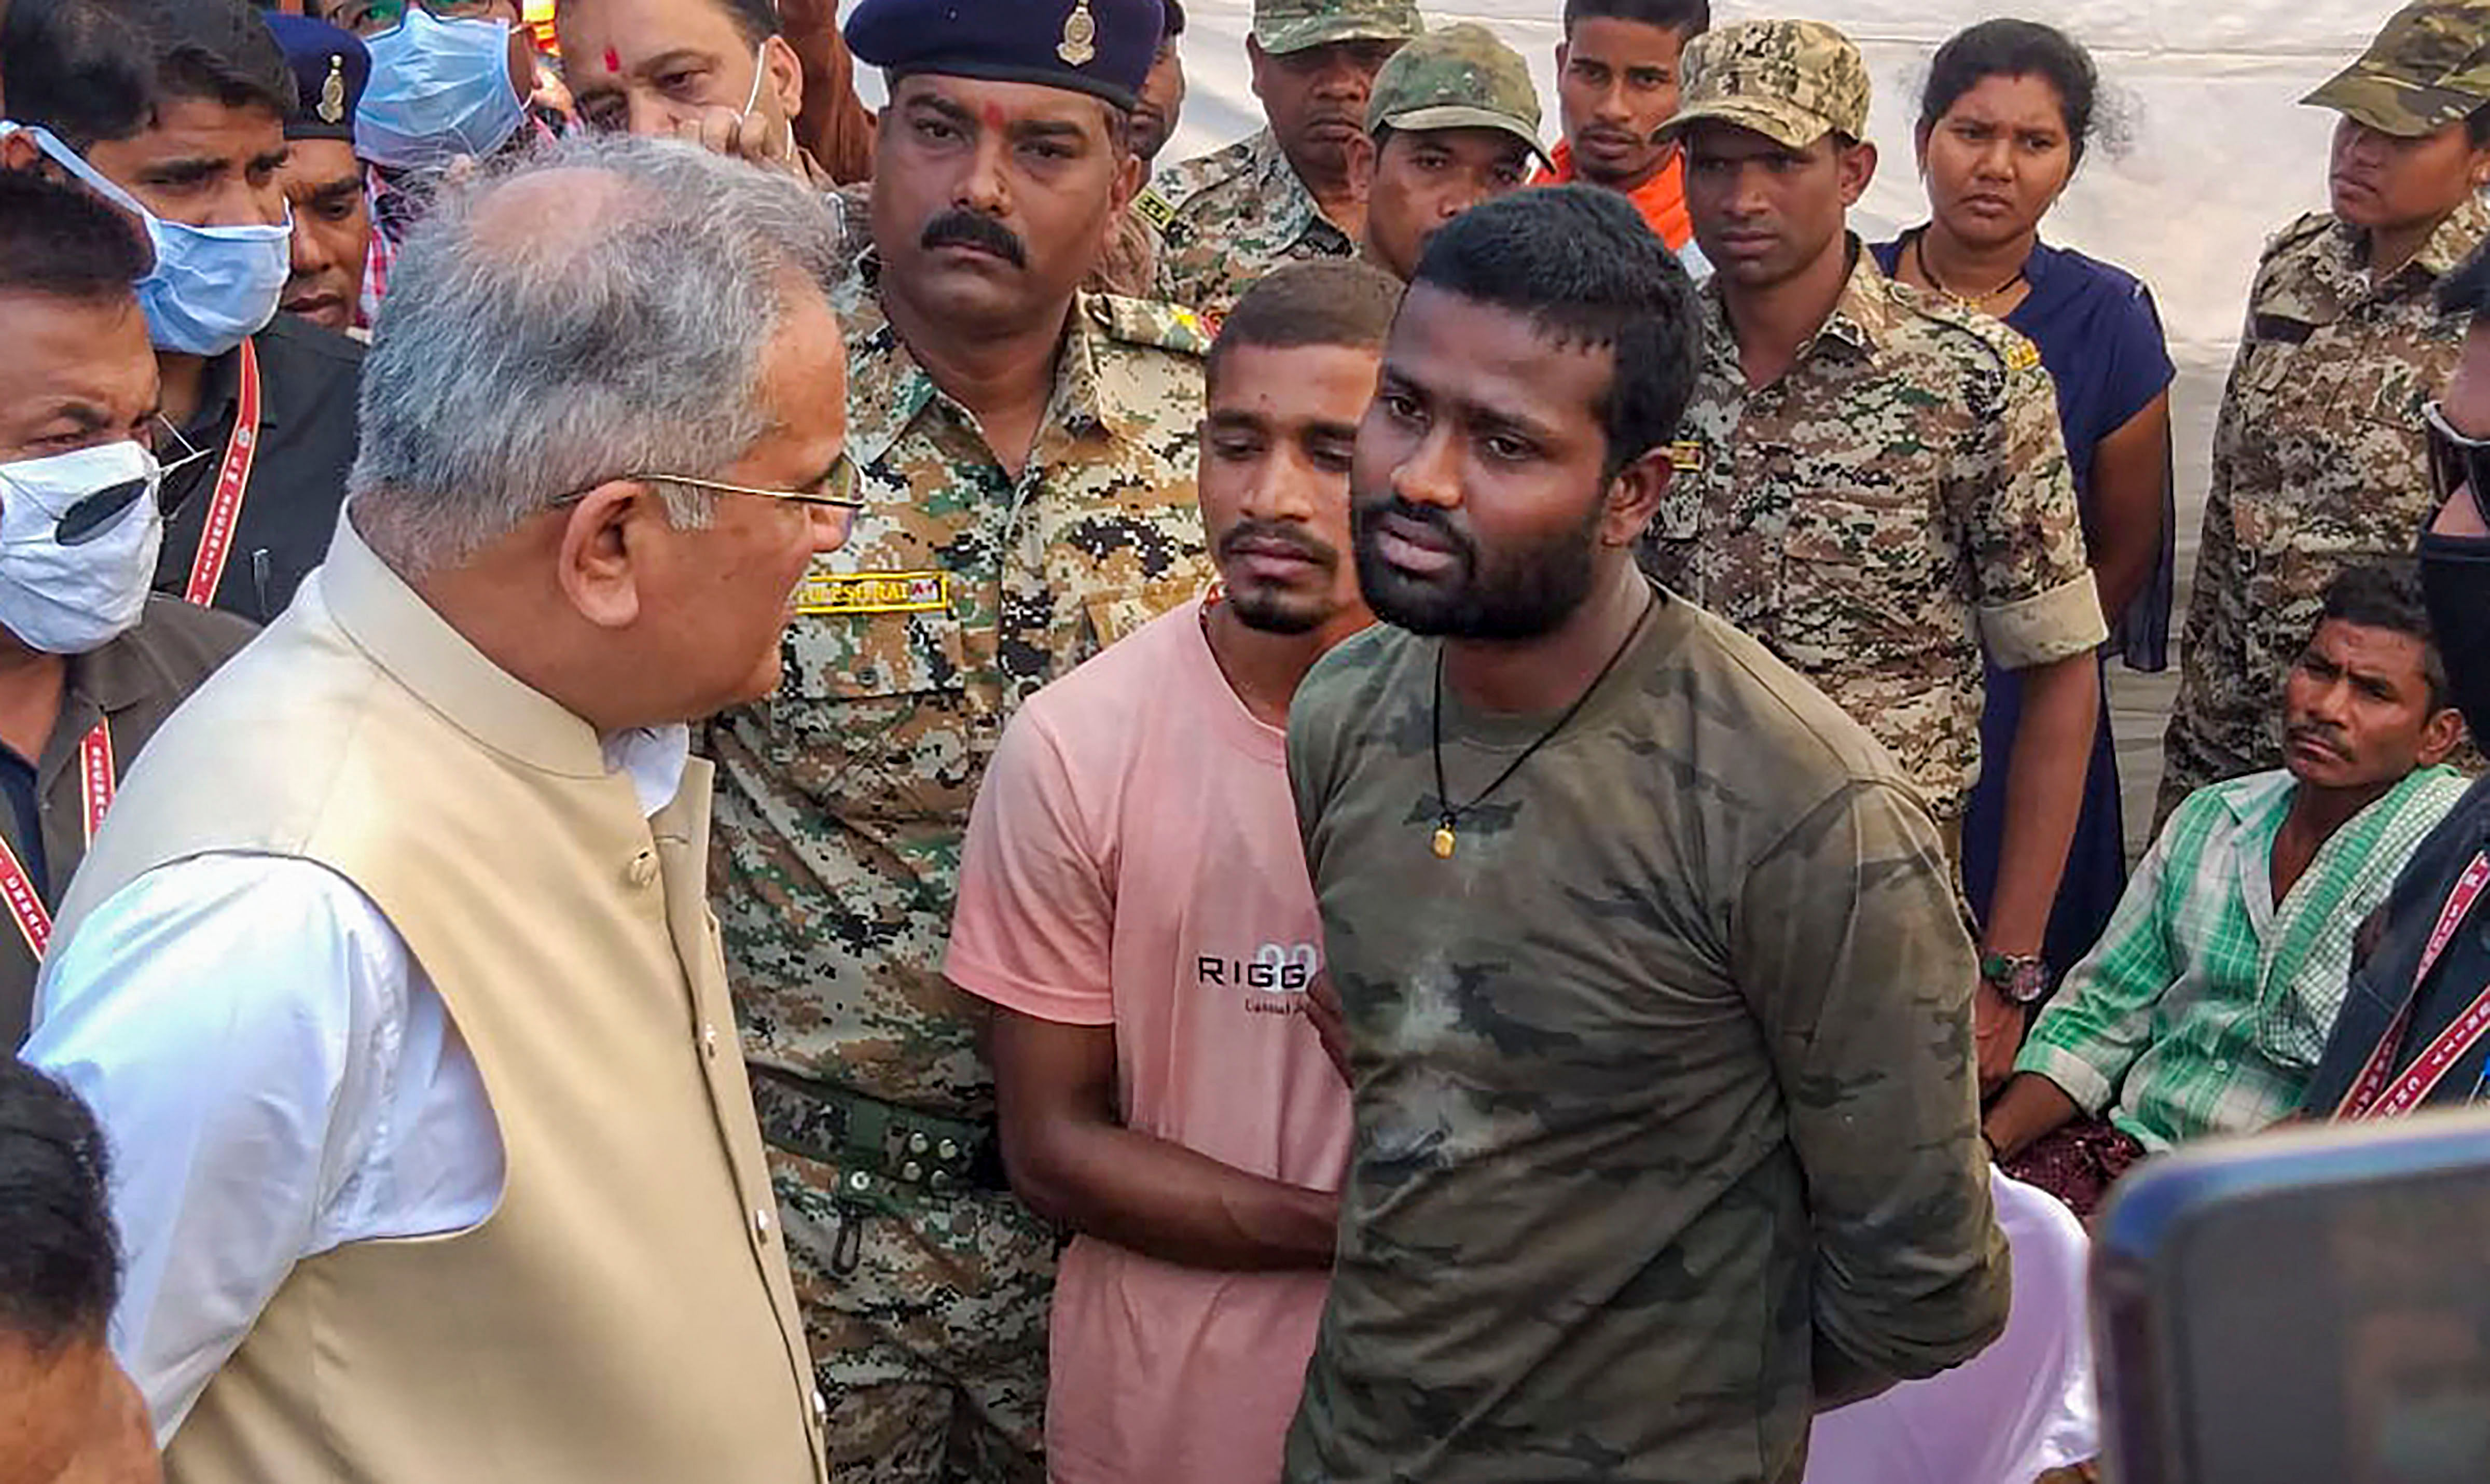 Chhattisgarh Chief Minister Bhupesh Baghel interacts with jawans after paying tribute to martyred troopers of STF and DRG, who lost their lives yesterday during the encounter between security forces and naxals. (Credit: PTI Photo)